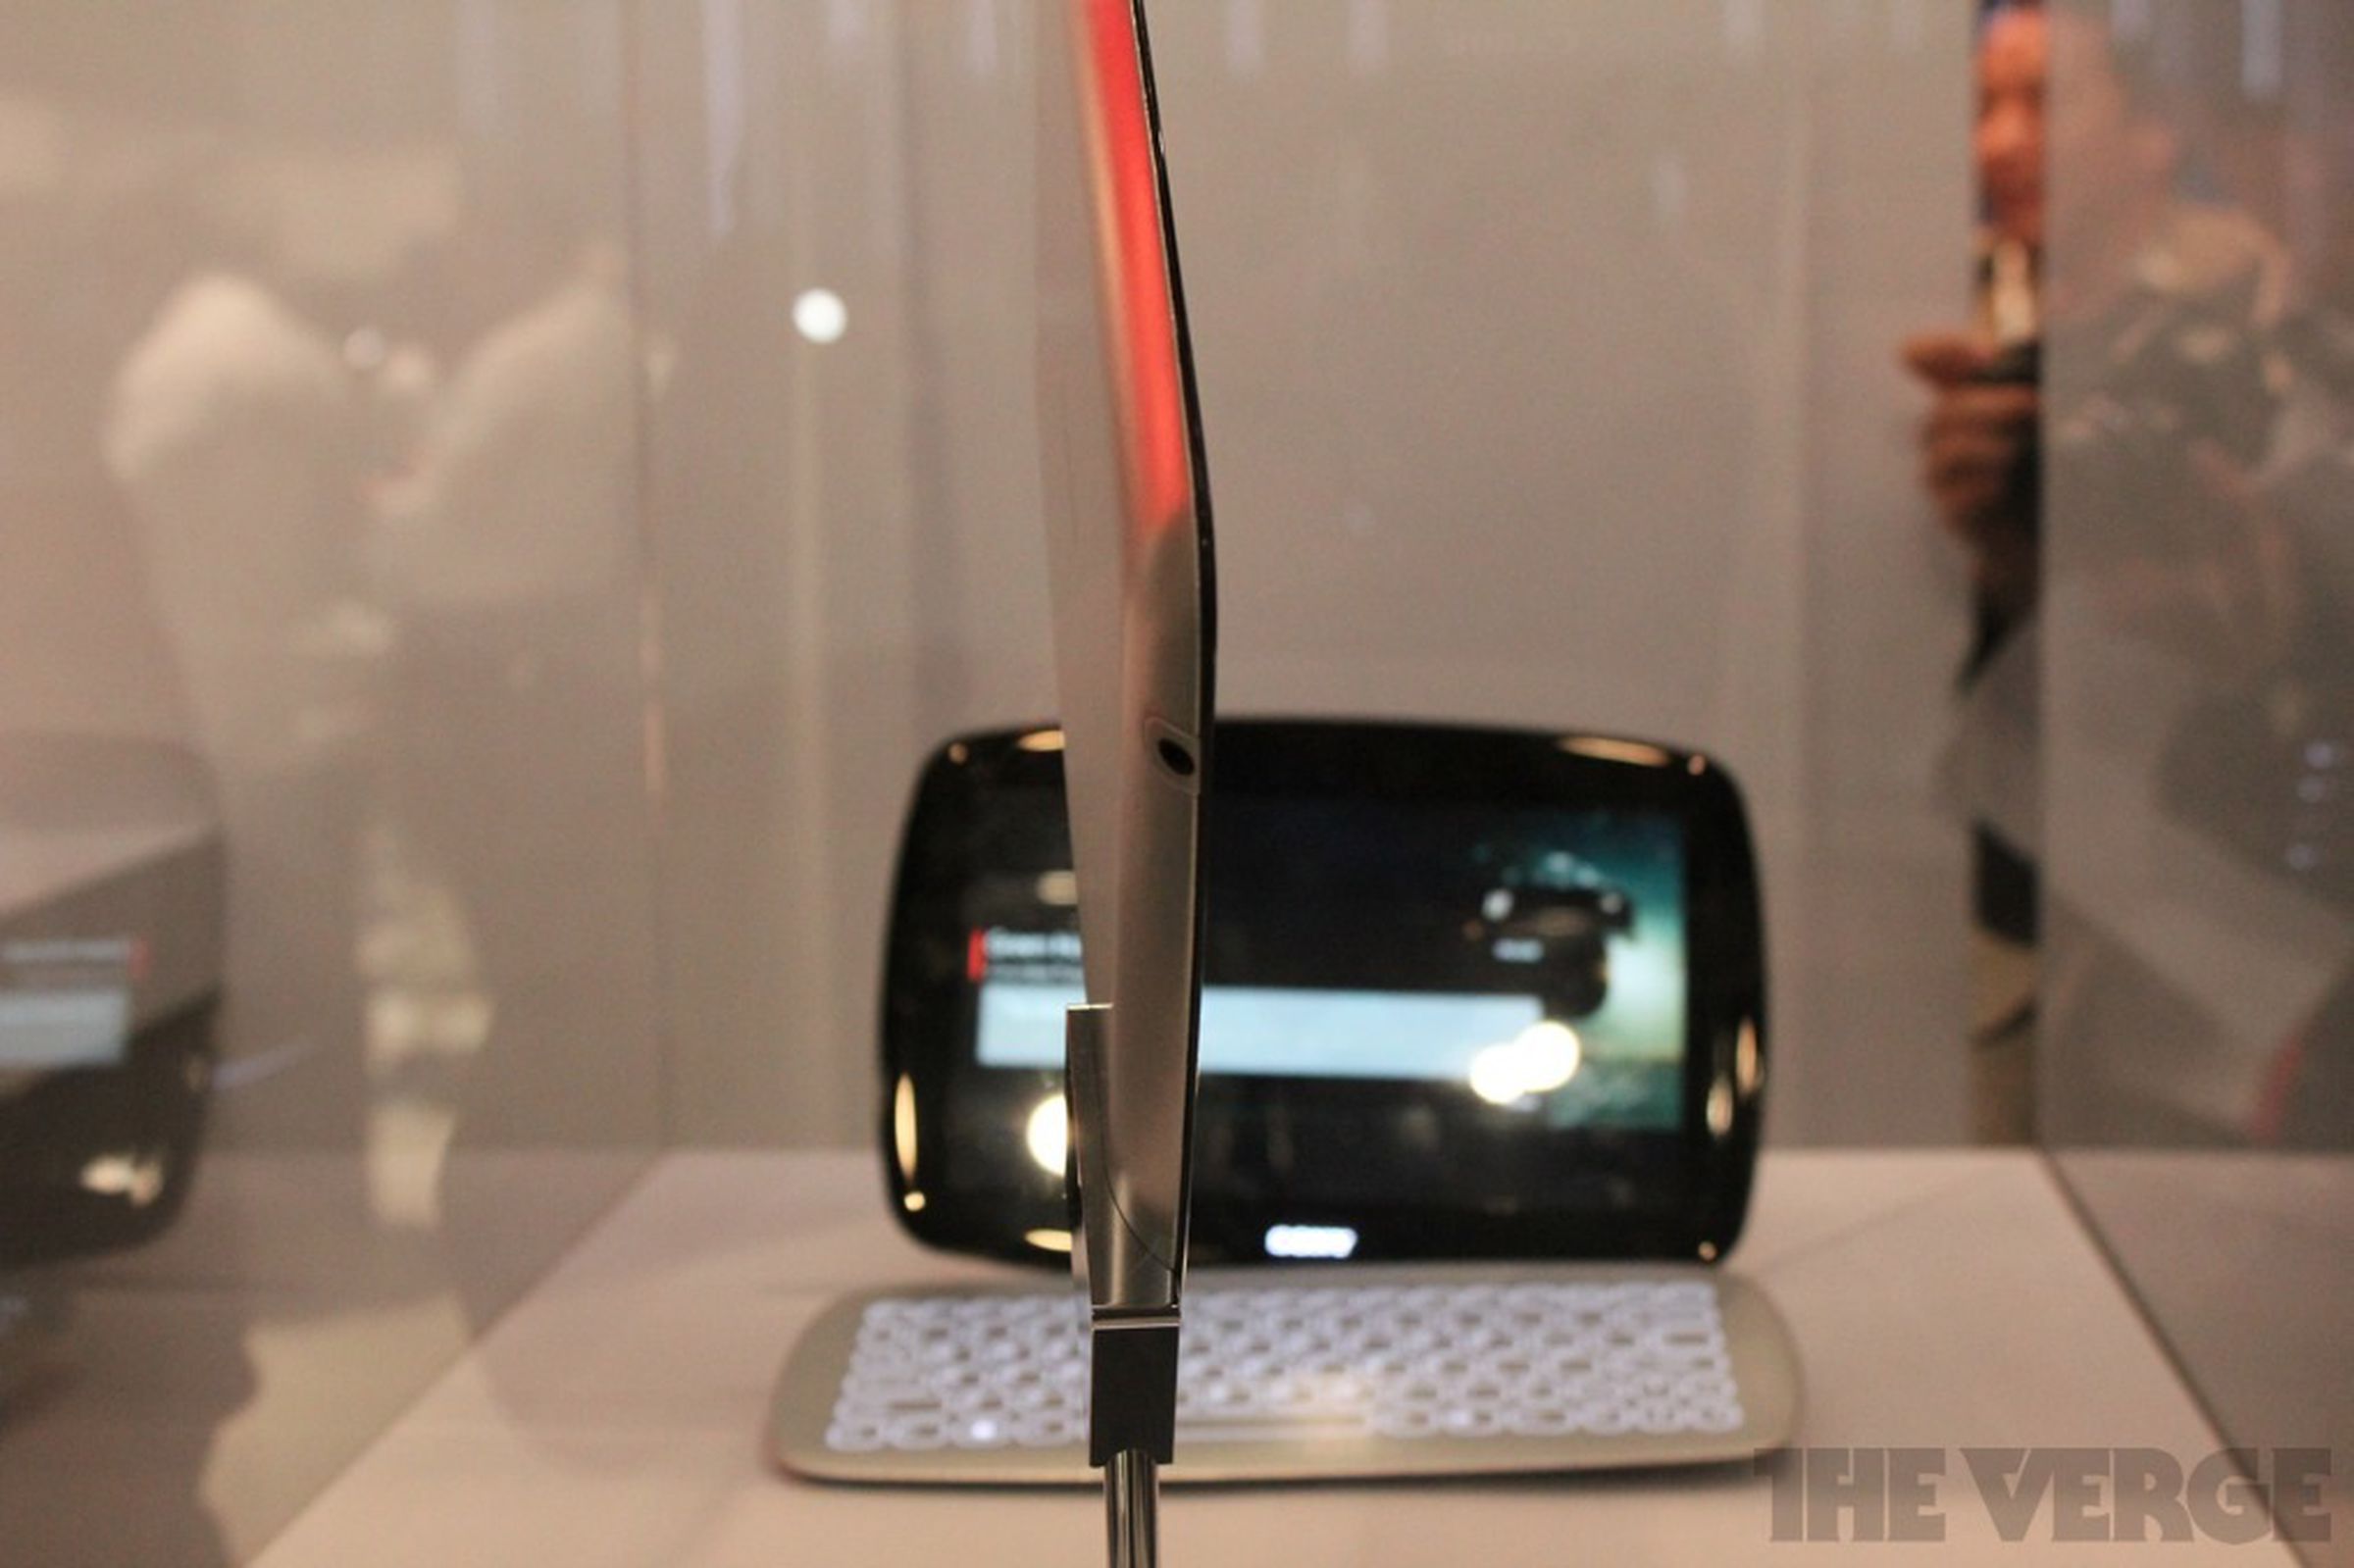 Sony tablet prototype with backlit keyboard photos